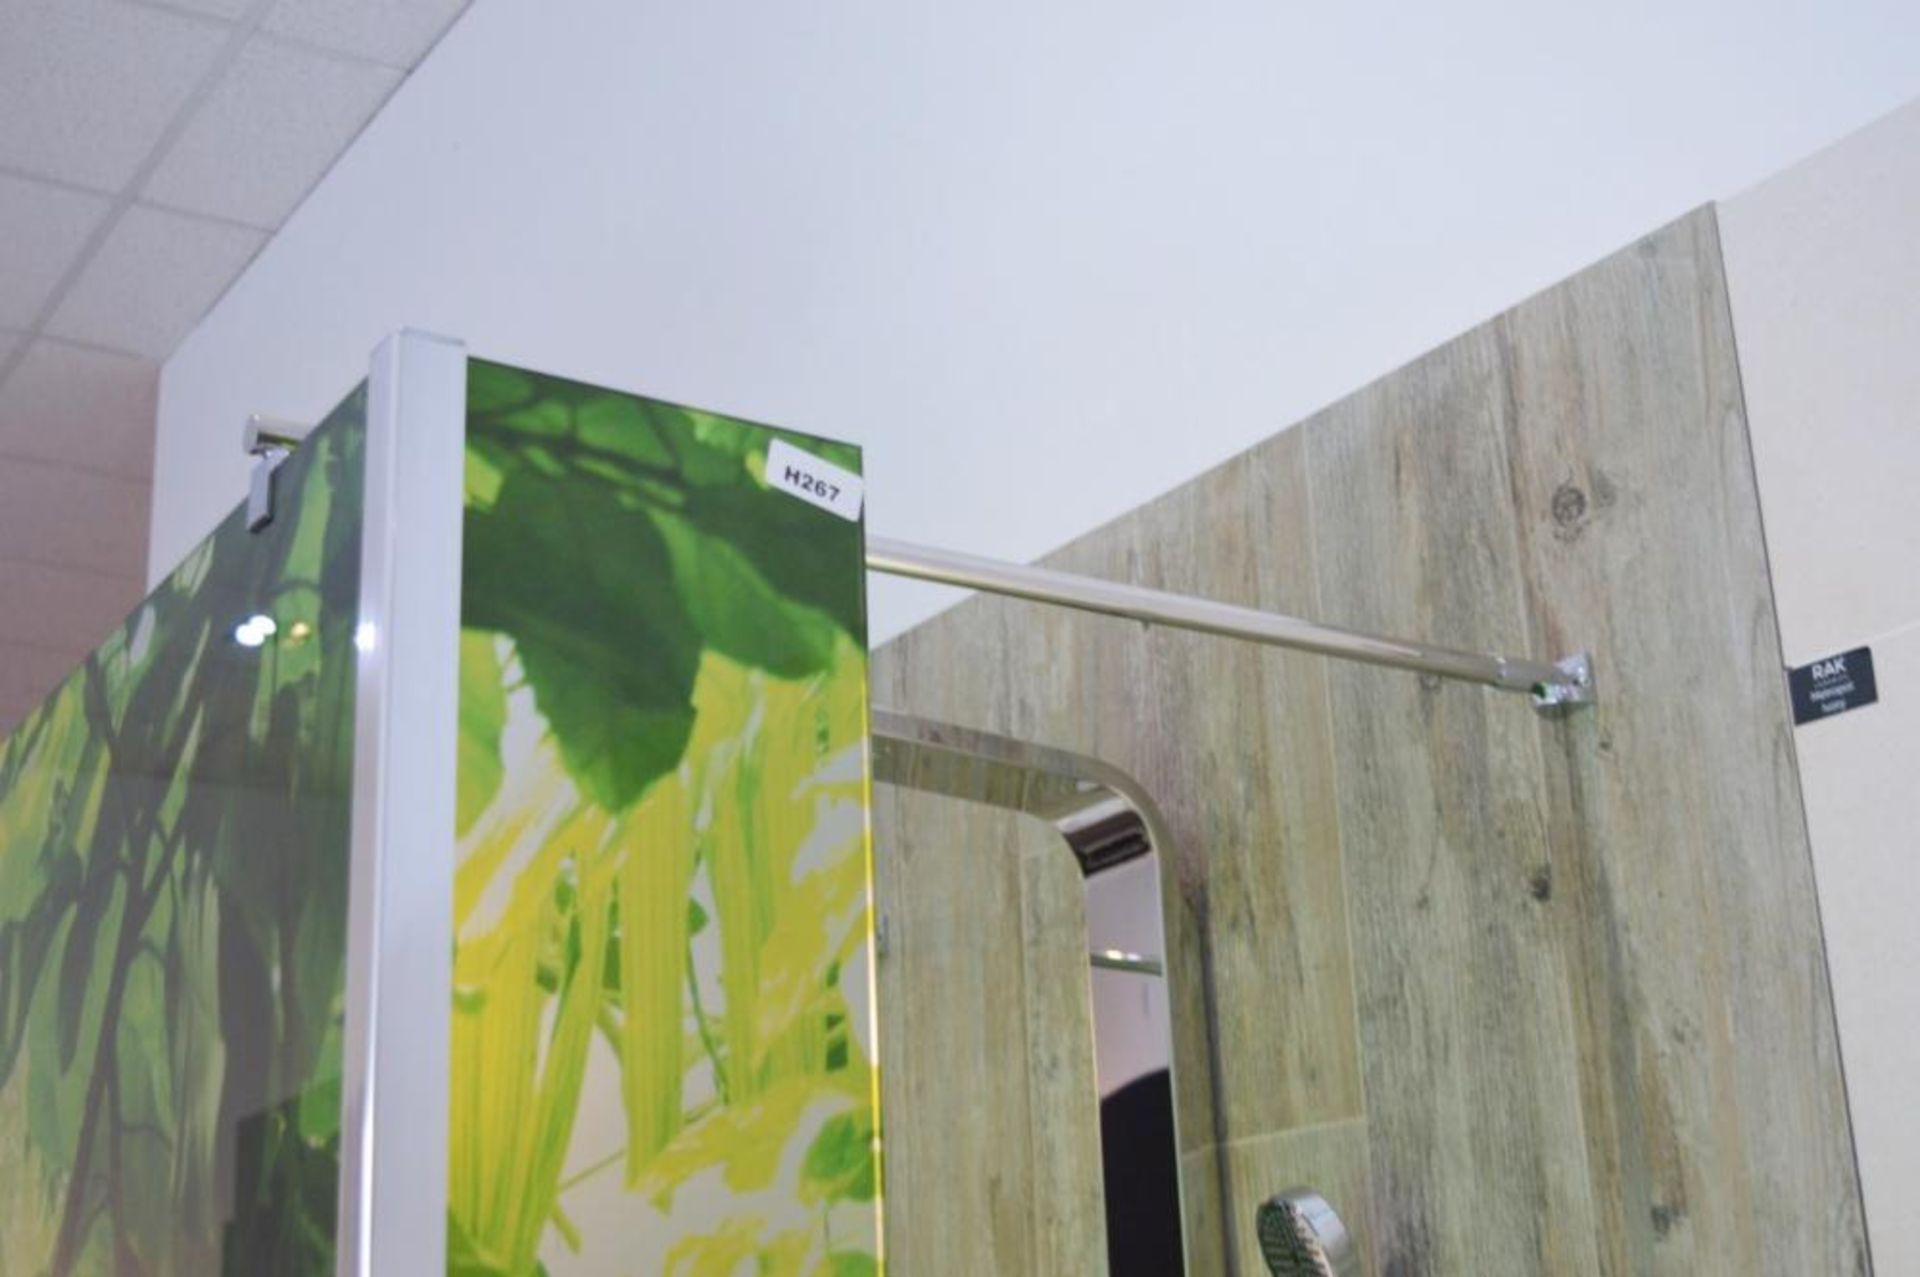 1 x Roman Showers Decam Expressions Rainforest Printed Wetroom Shower Panel With Left and Right Retu - Image 3 of 7